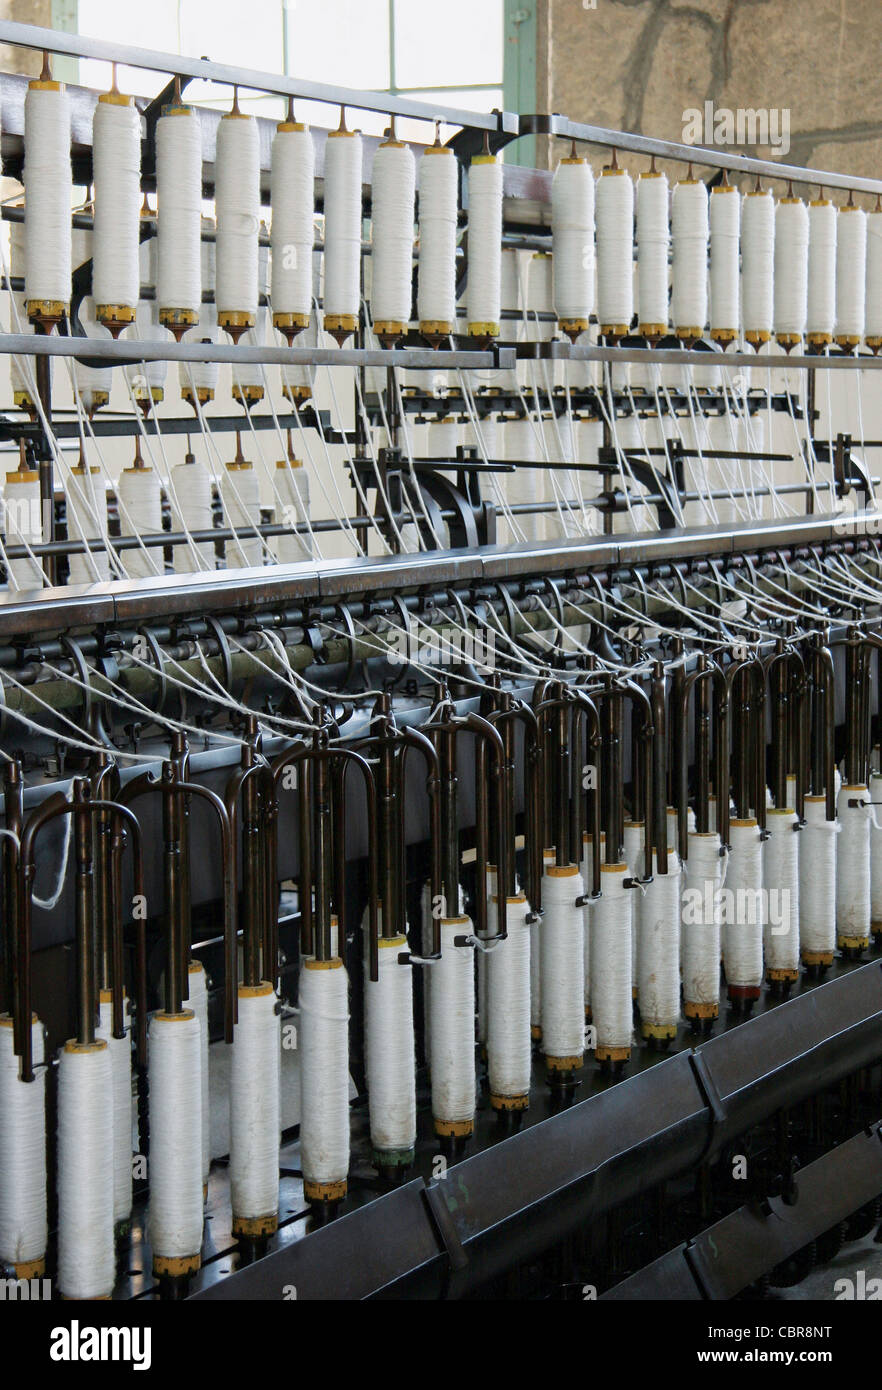 Textile industry. Machine used in the spinning process. Catalonia